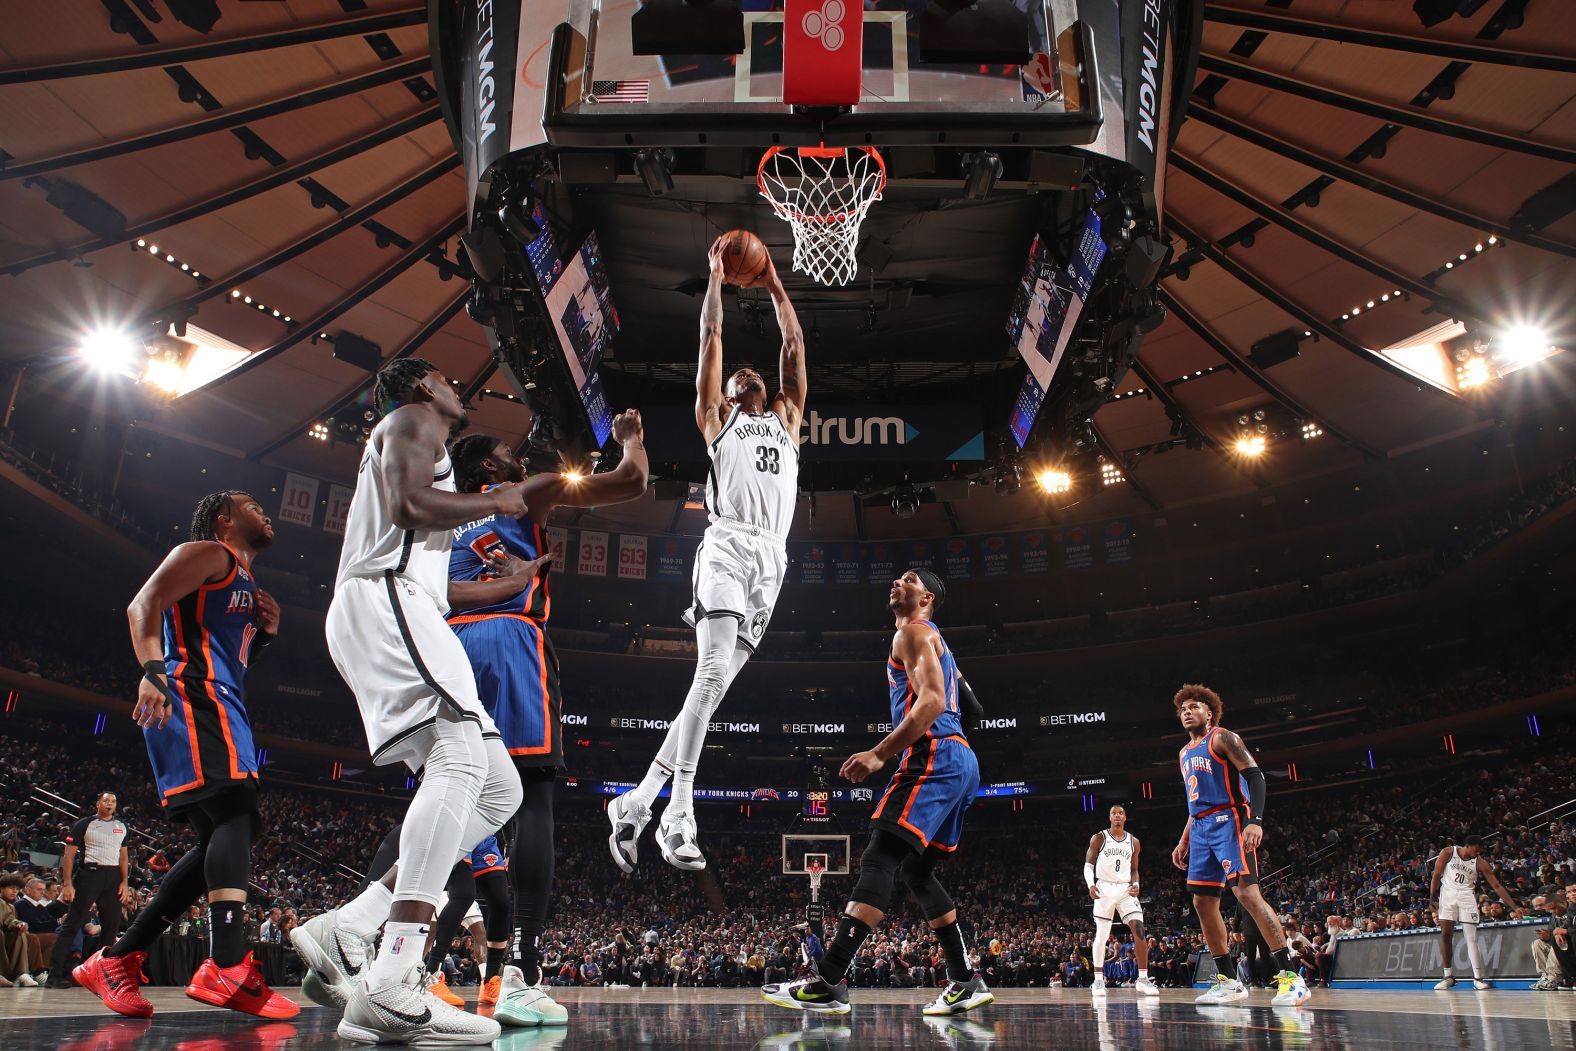 Brooklyn Nets center Nicolas Claxton dunks the ball during an NBA game against the New York Knicks on Saturday, March 23.